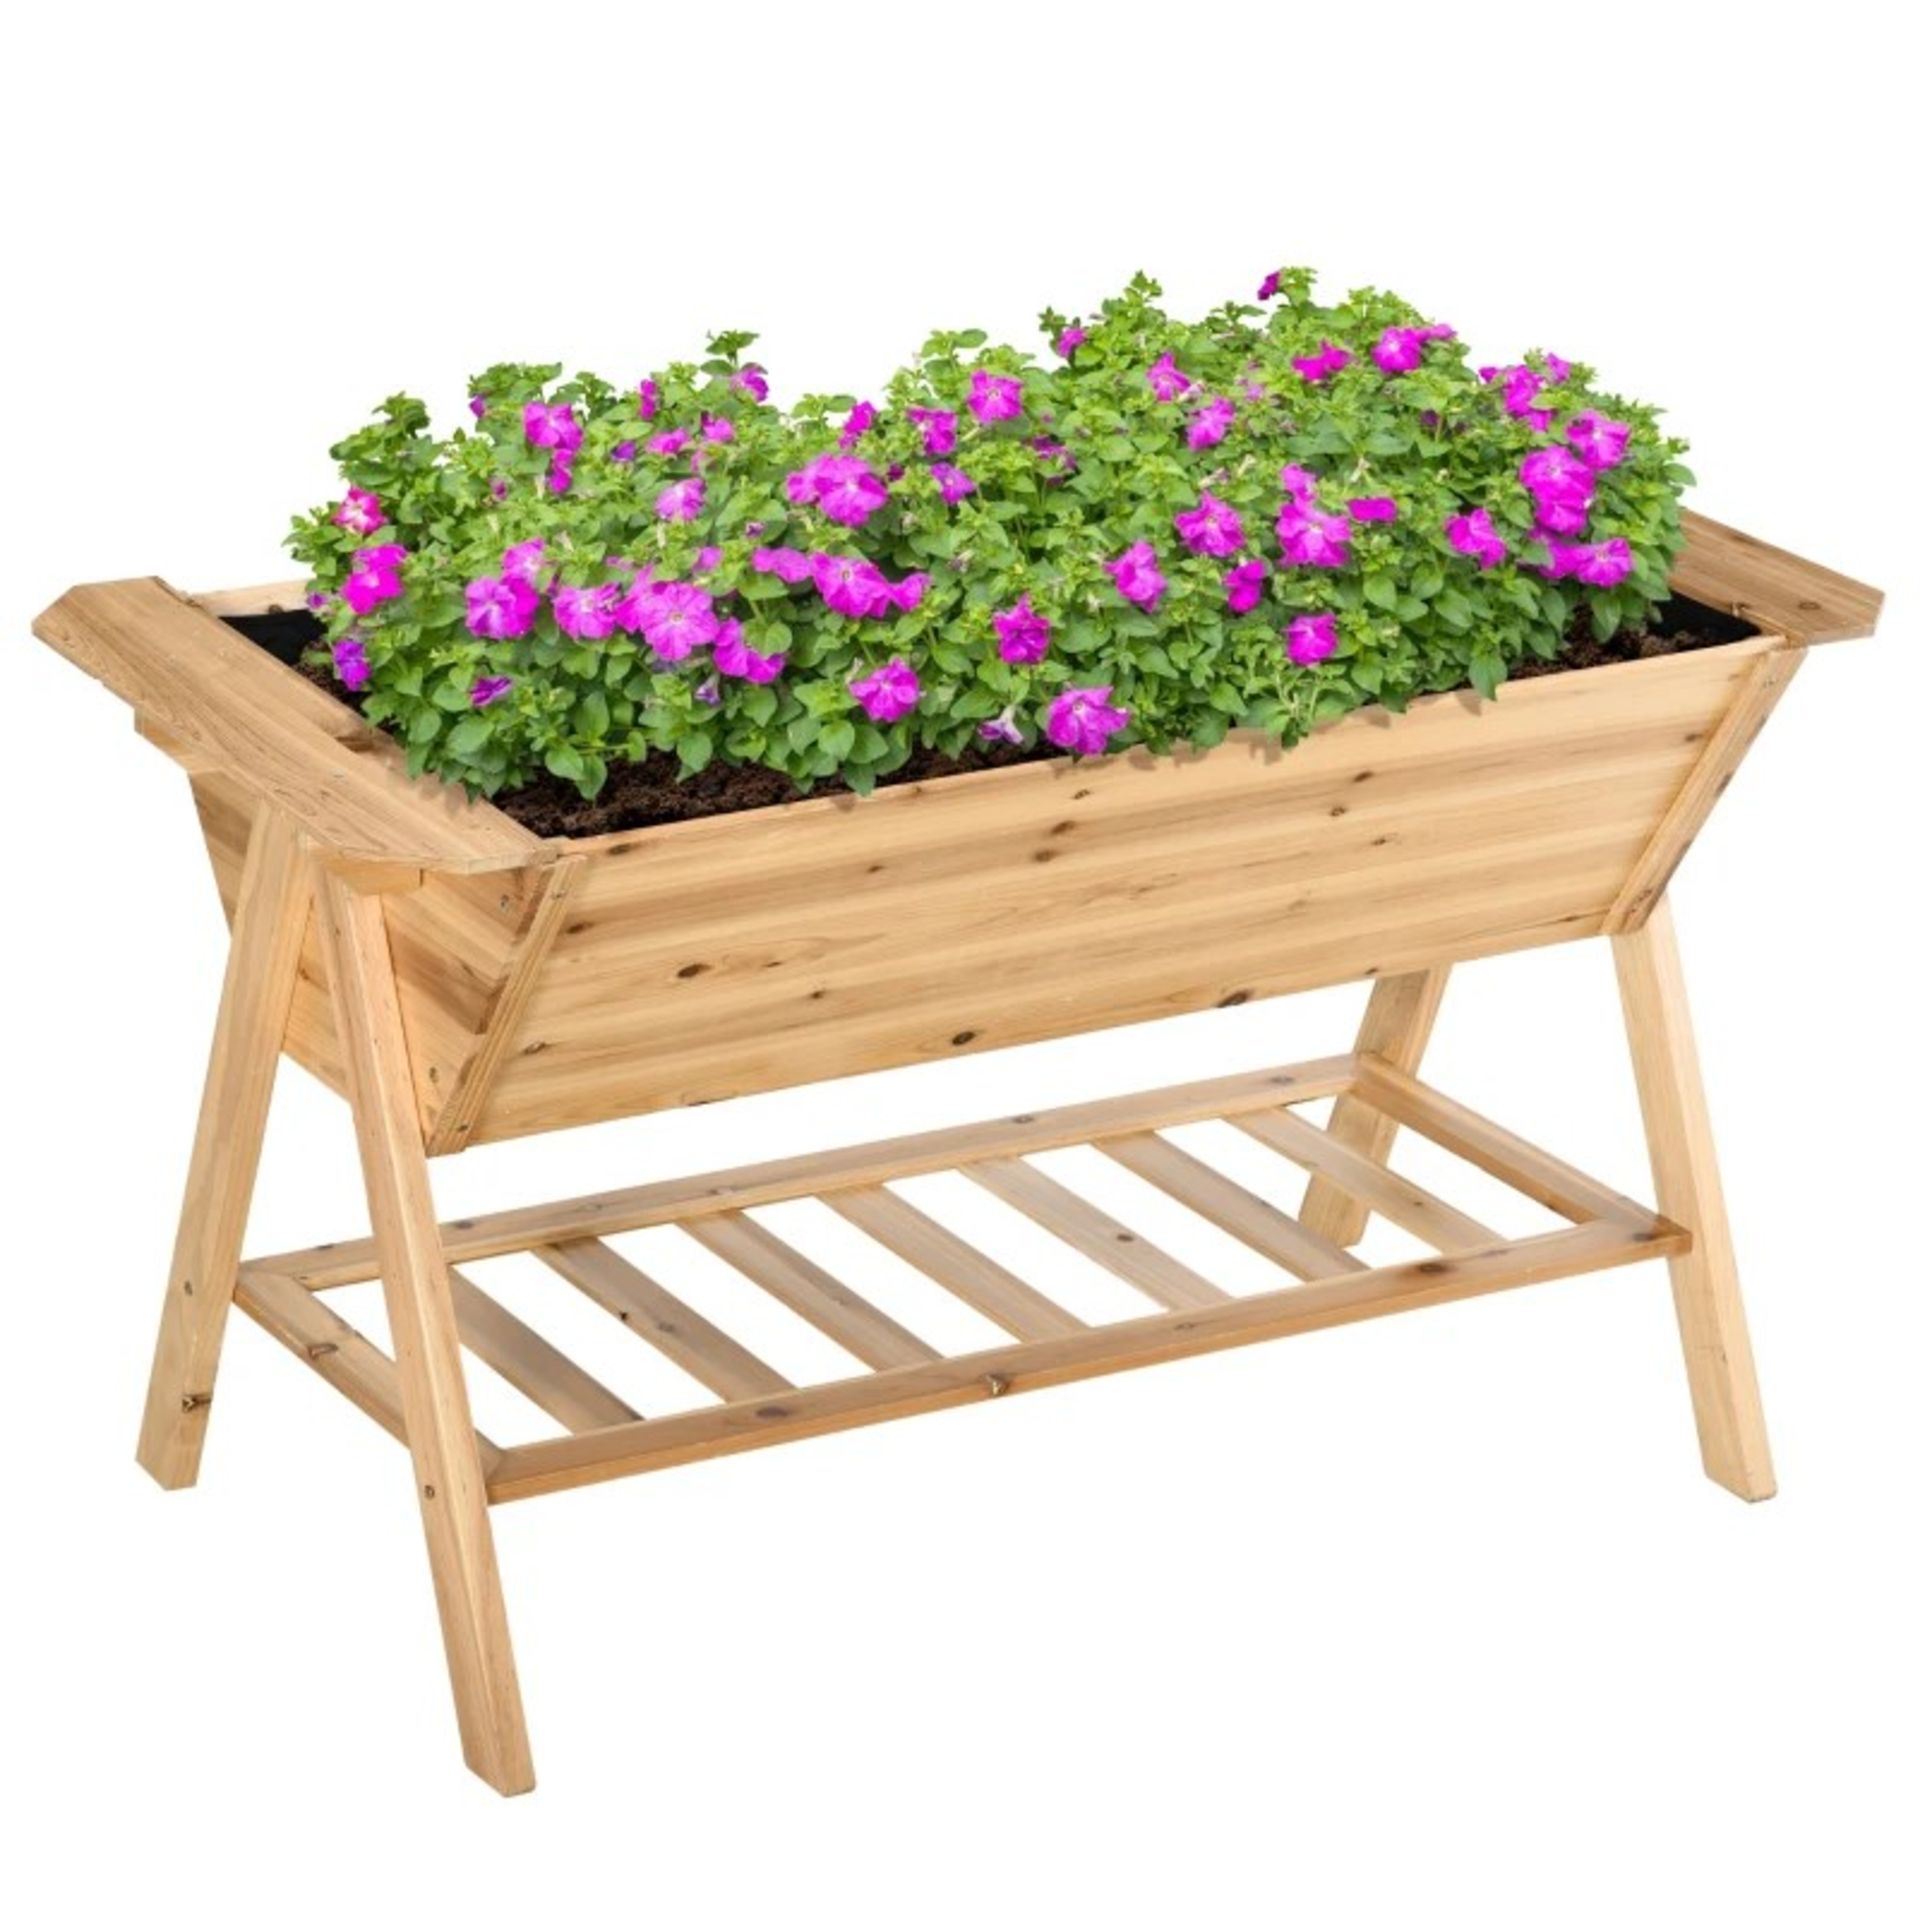 RRP £129.99 - Wooden Planter Garden Raised Bed Free Standing with Storage Shelf Plates - - Image 2 of 4